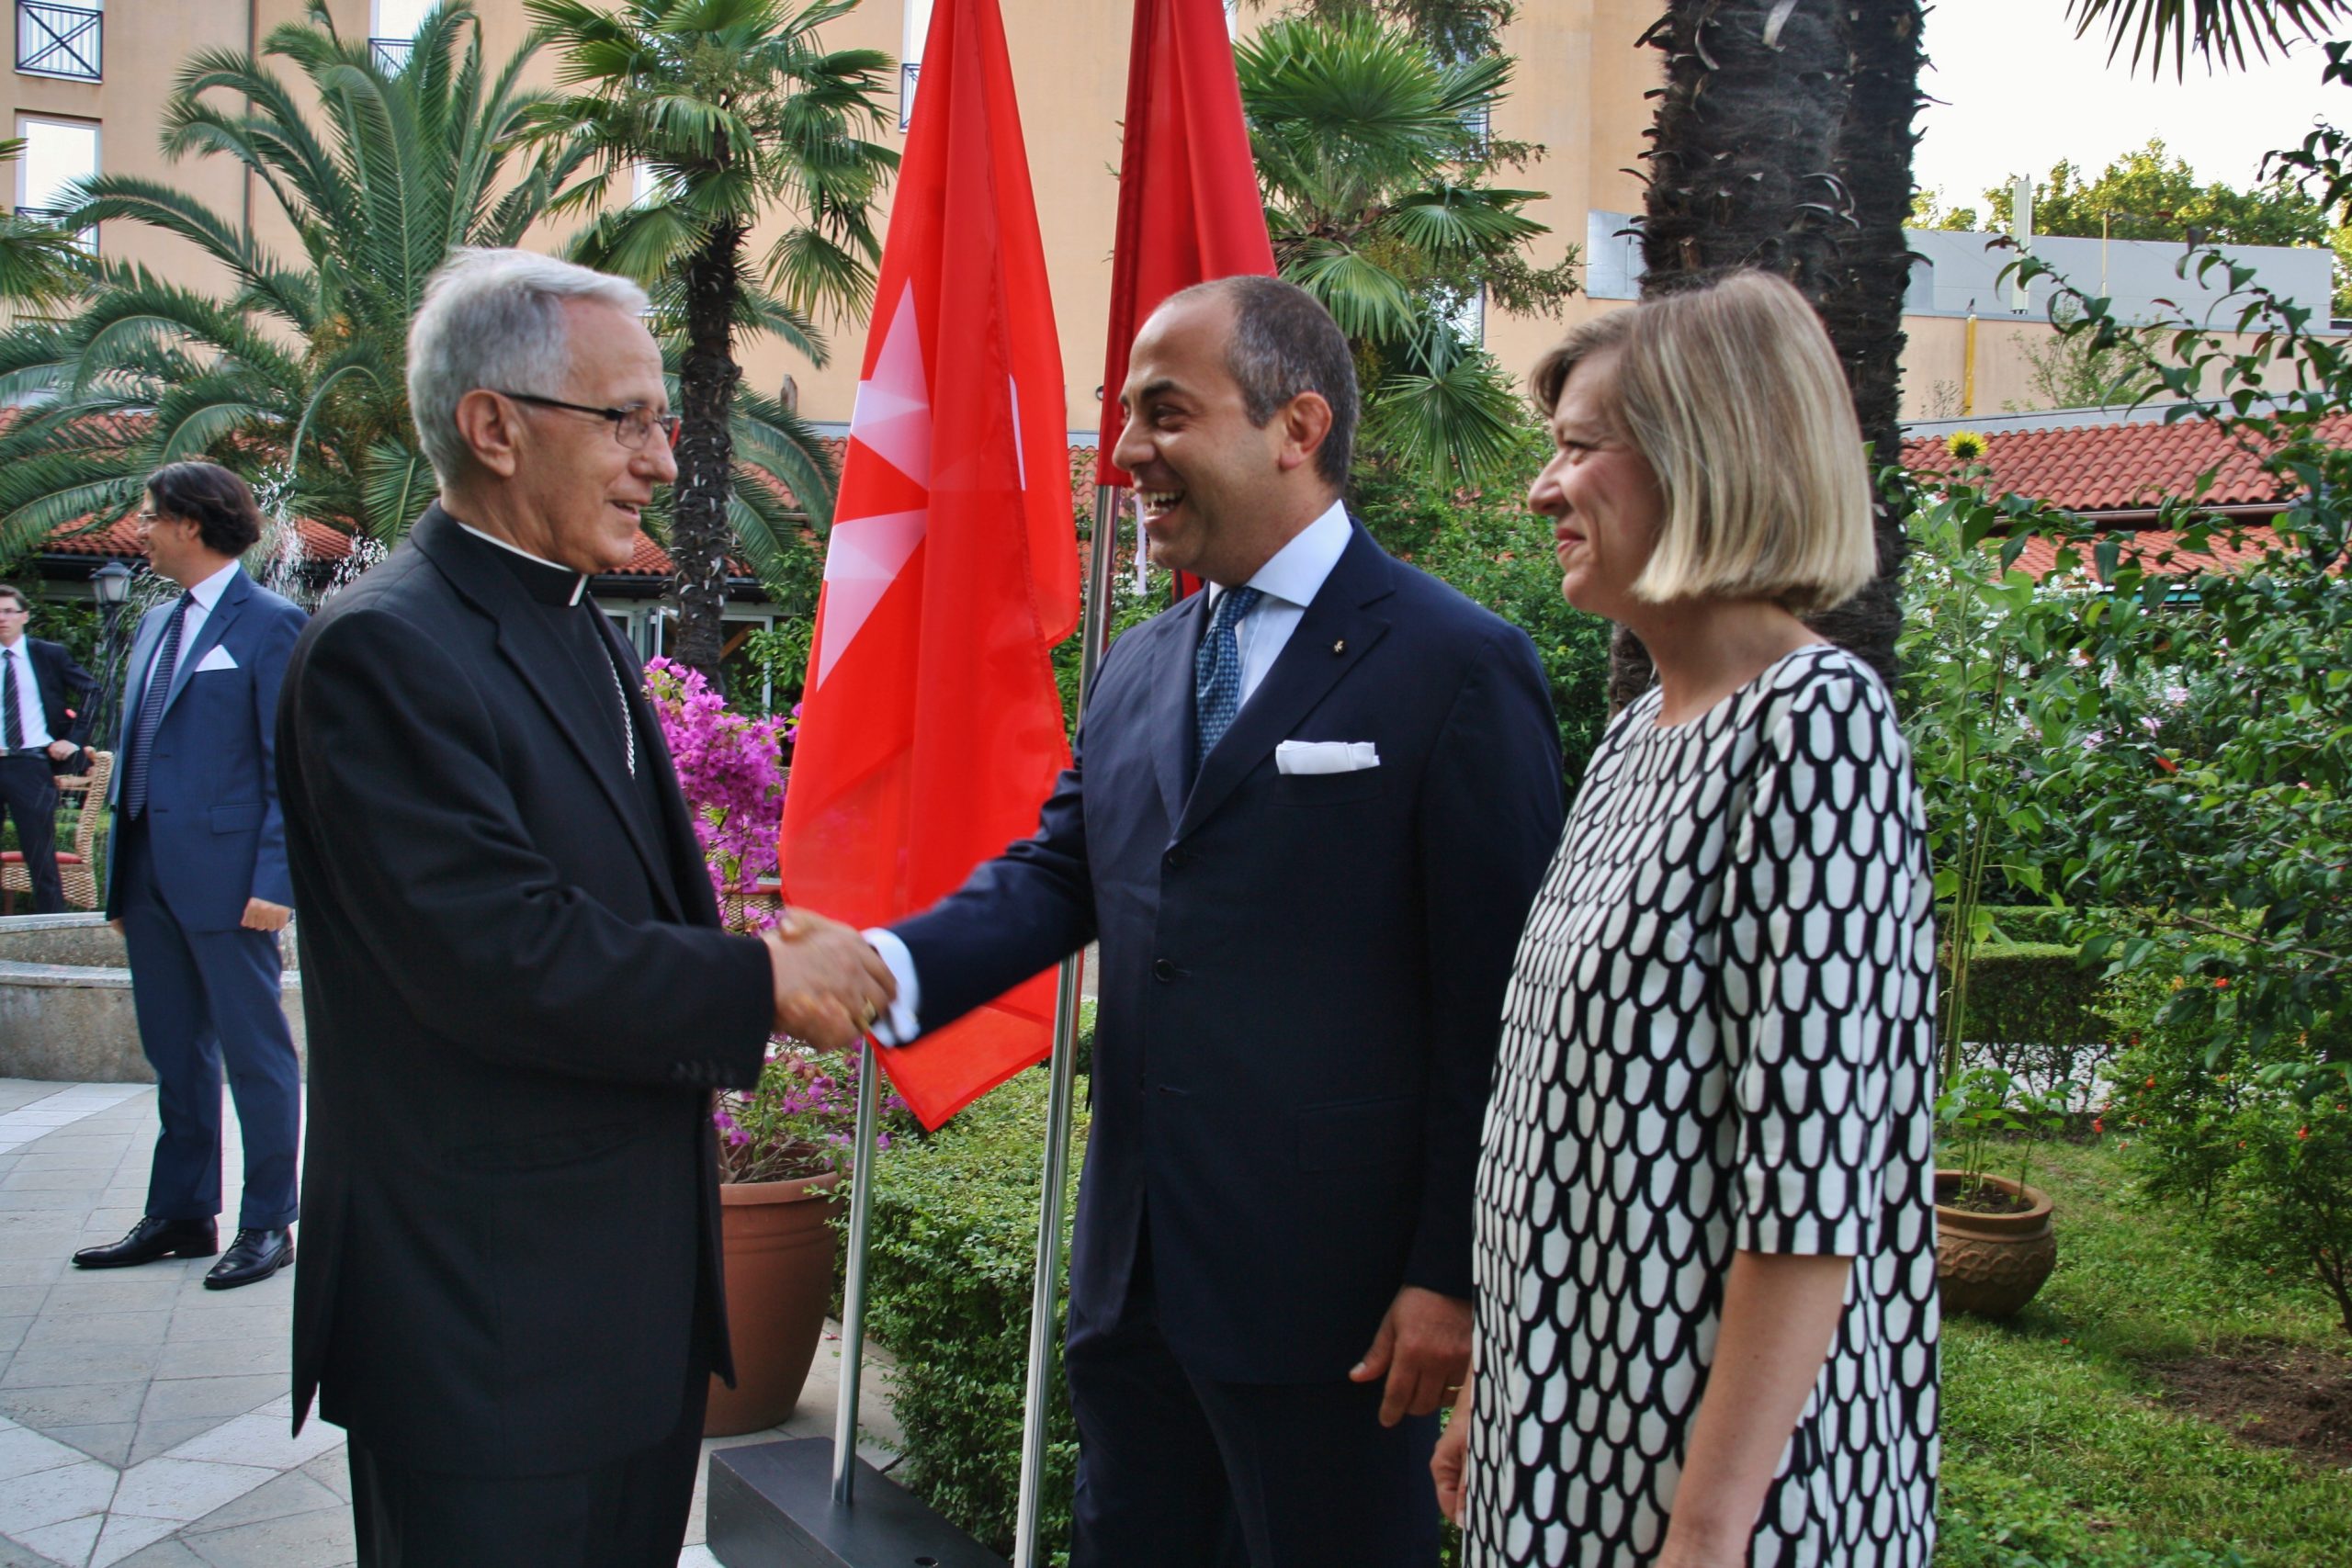 Ambassador Stefano Palumbo hosts his first reception on the occasion of the Solemnity of St. John the Baptist